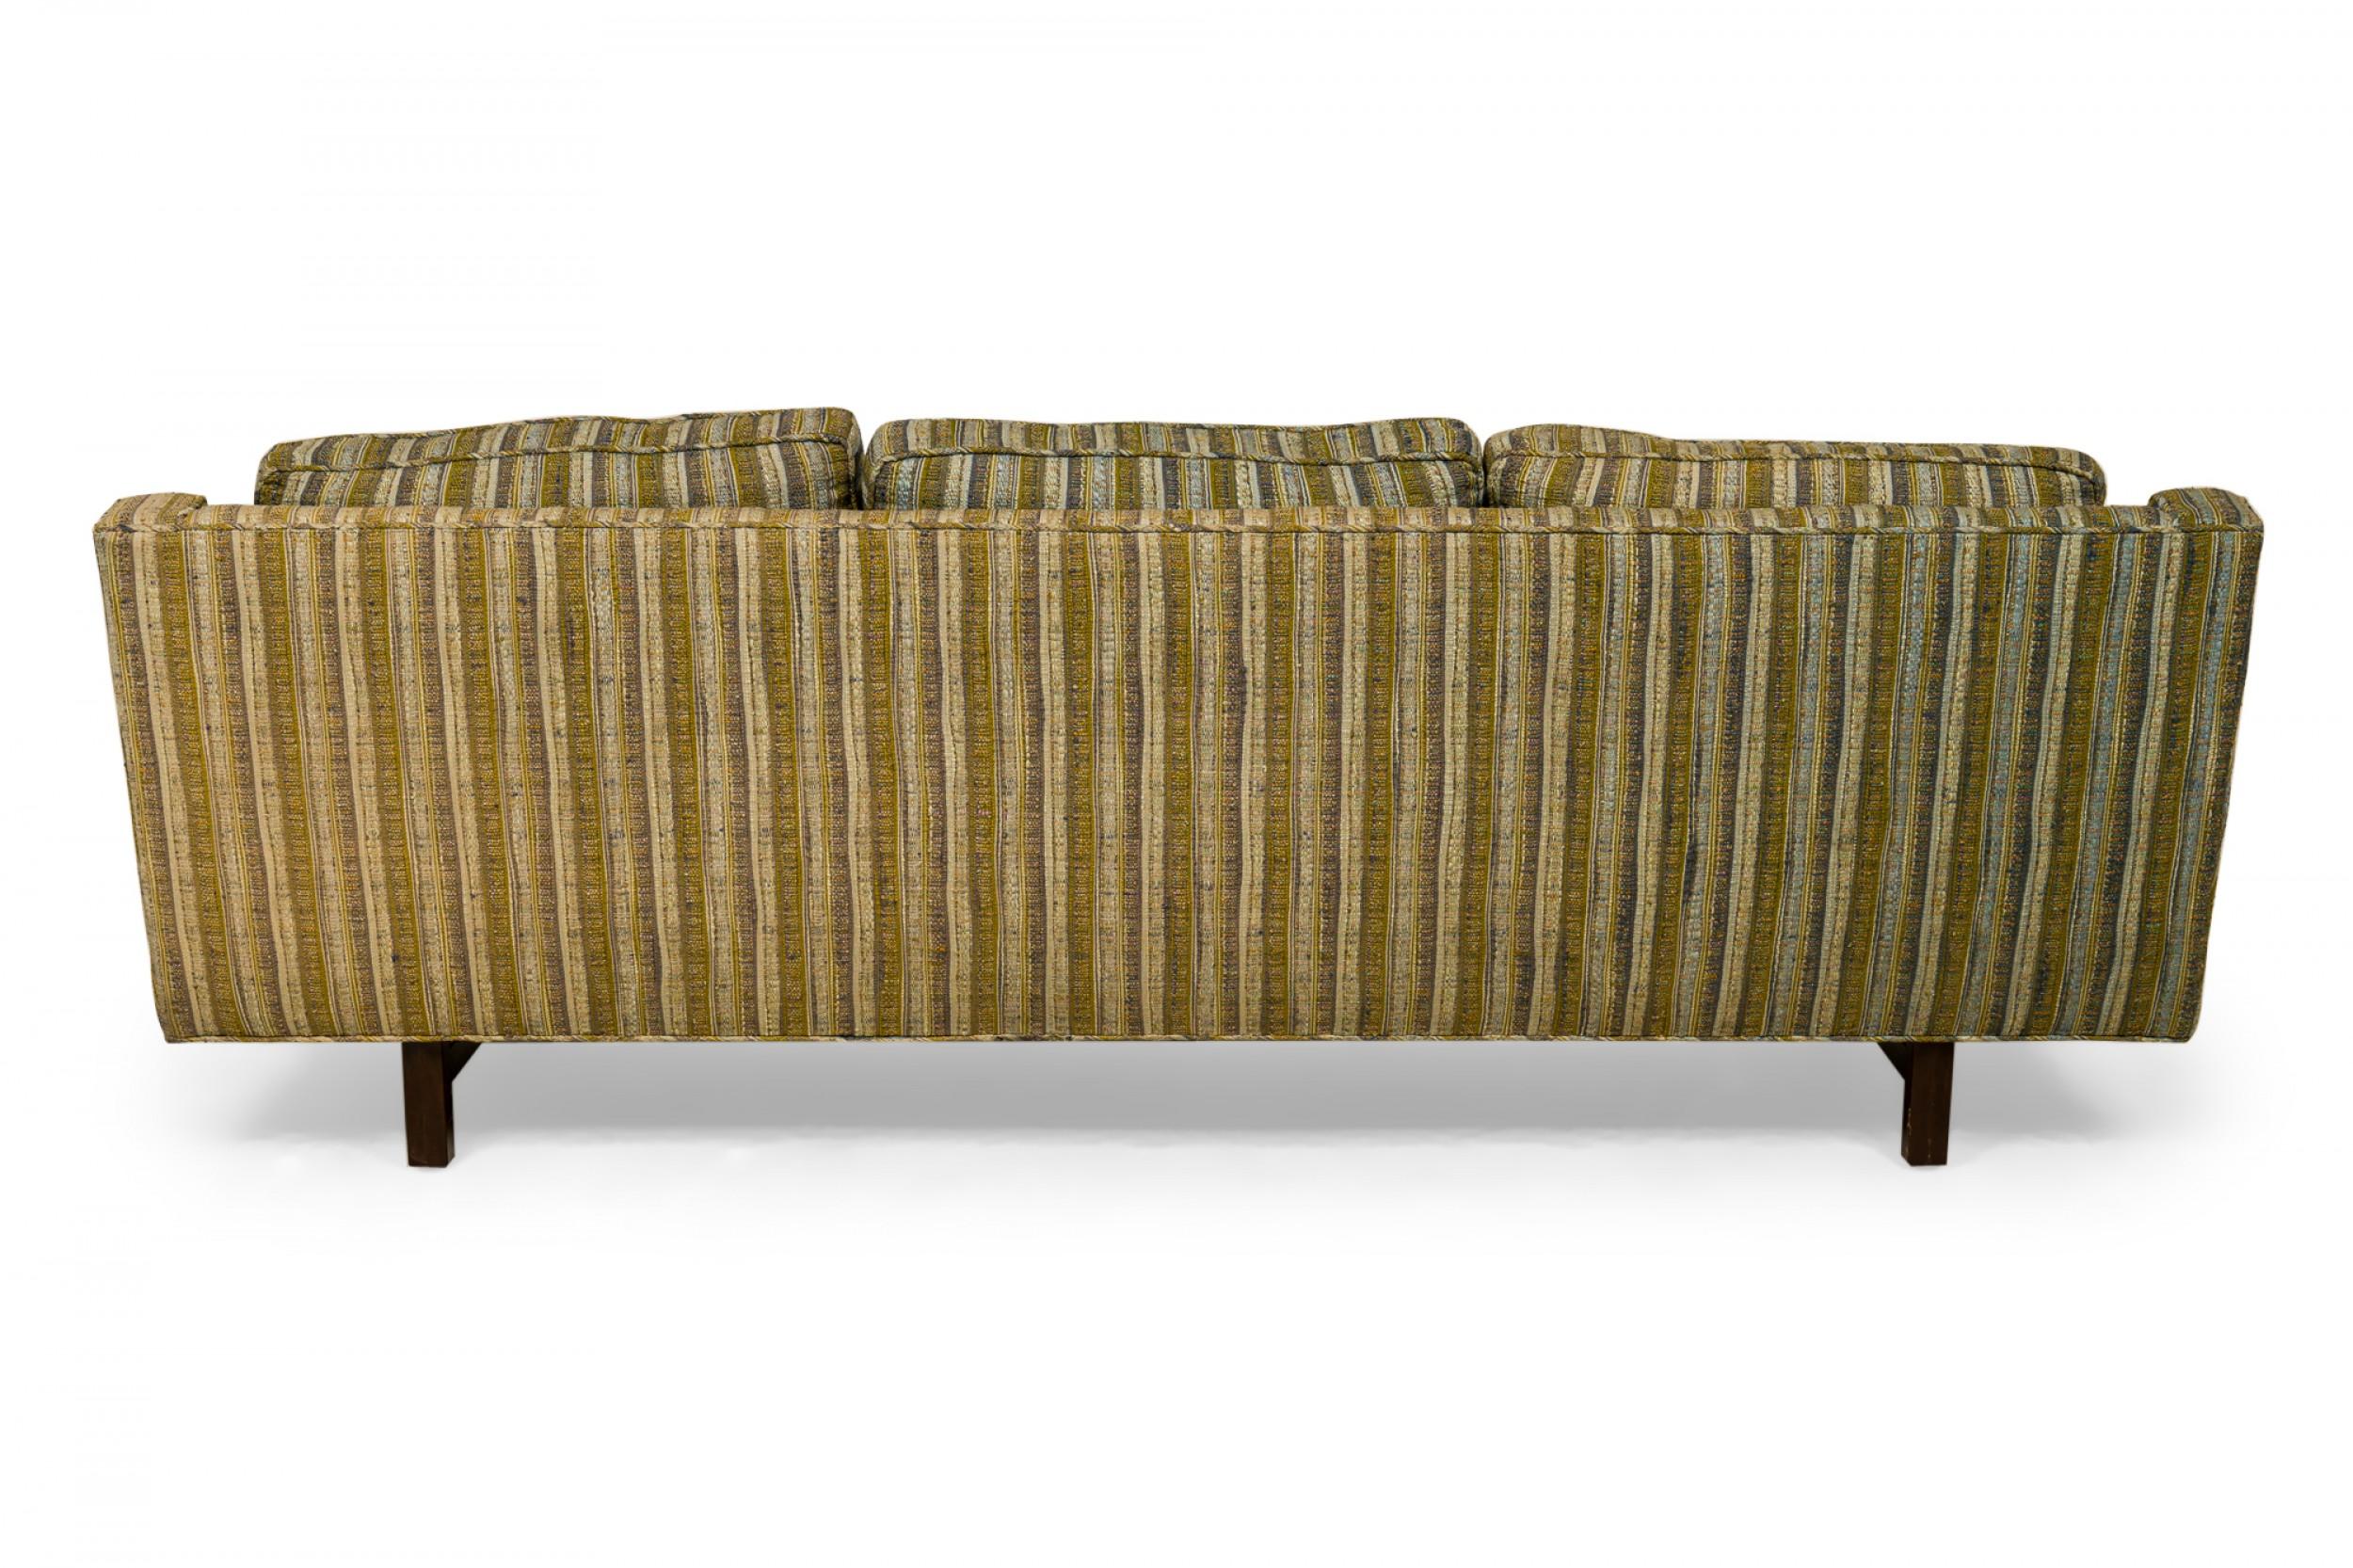 American Edward Wormley for Dunbar Green and Beige Striped Upholstered Three-Seat Sofa For Sale